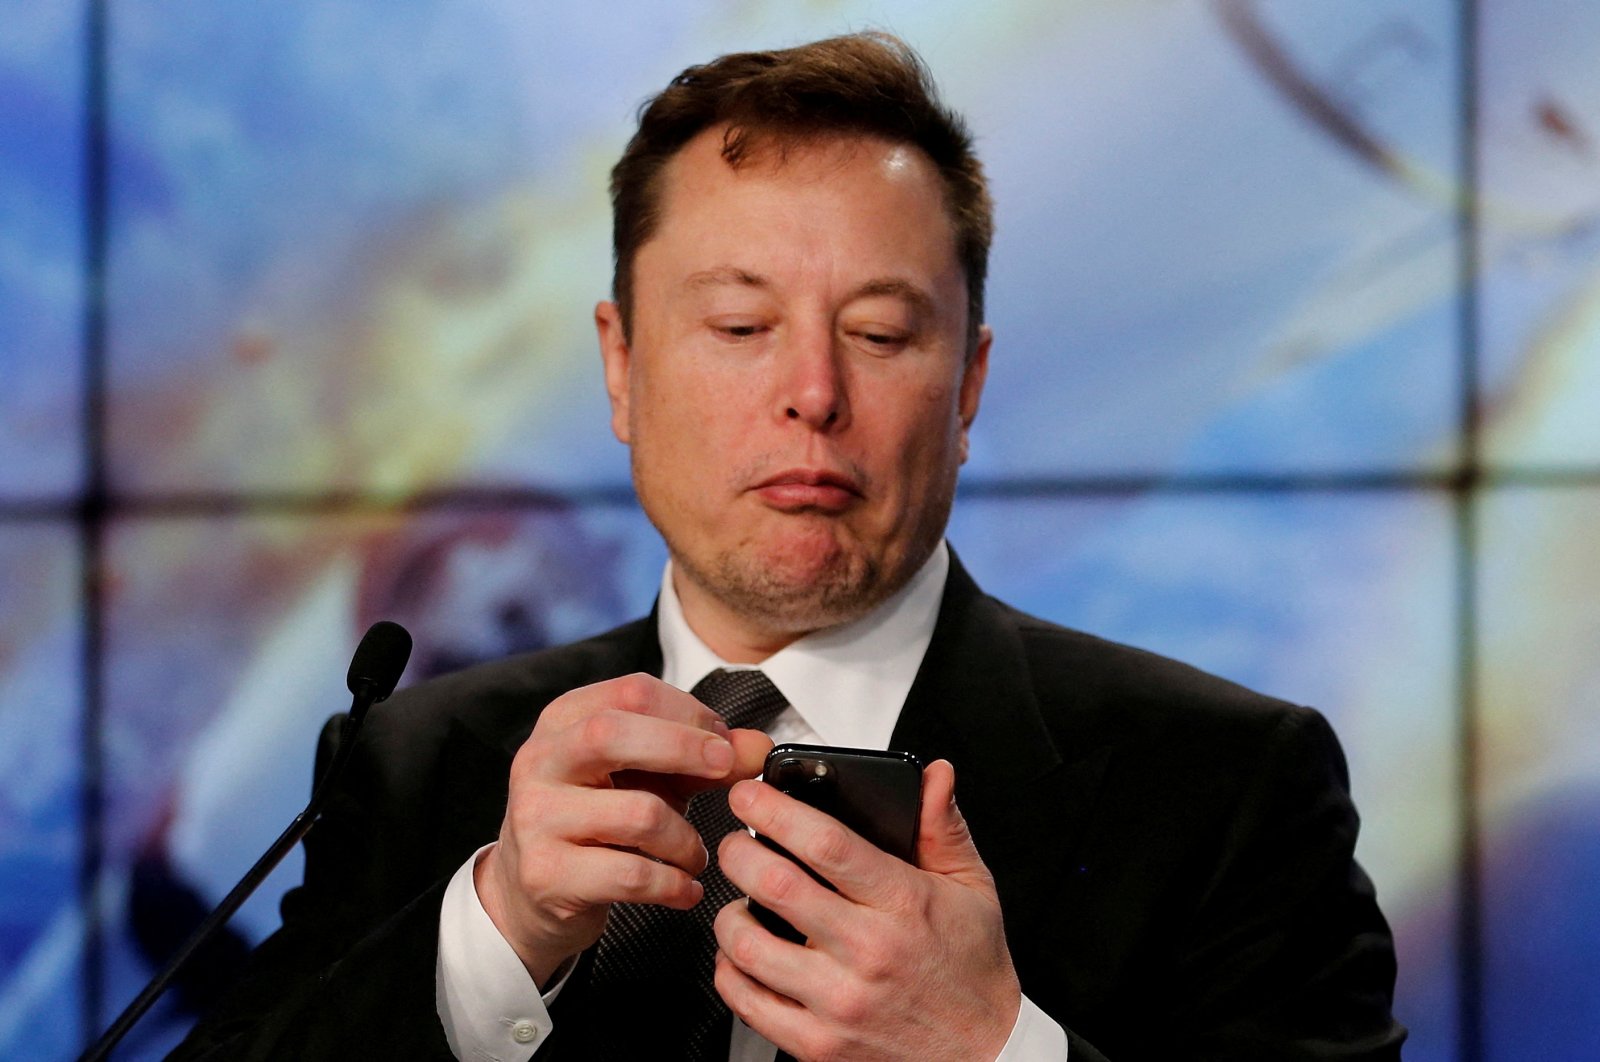 Elon Musk looks at his mobile phone in Cape Canaveral, Florida, U.S., Jan. 19, 2020. (Reuters File Photo)